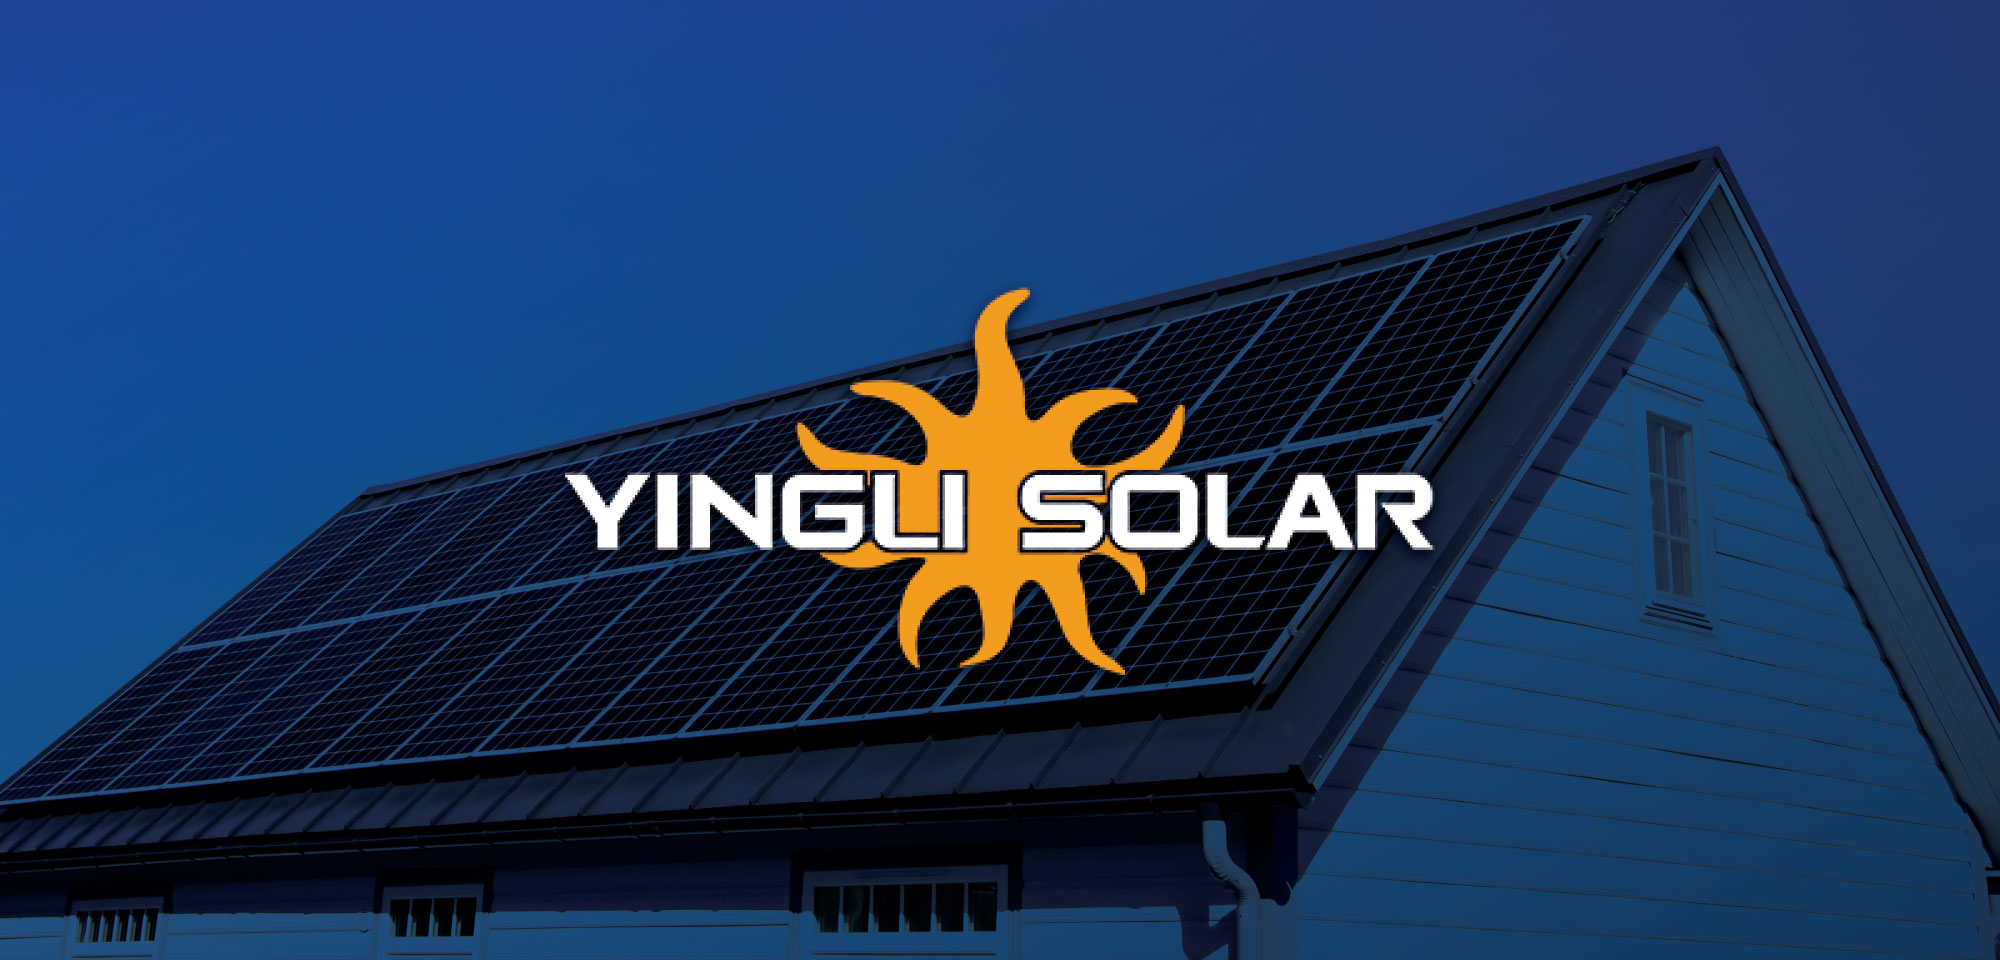 Yingli solar panels: the complete review